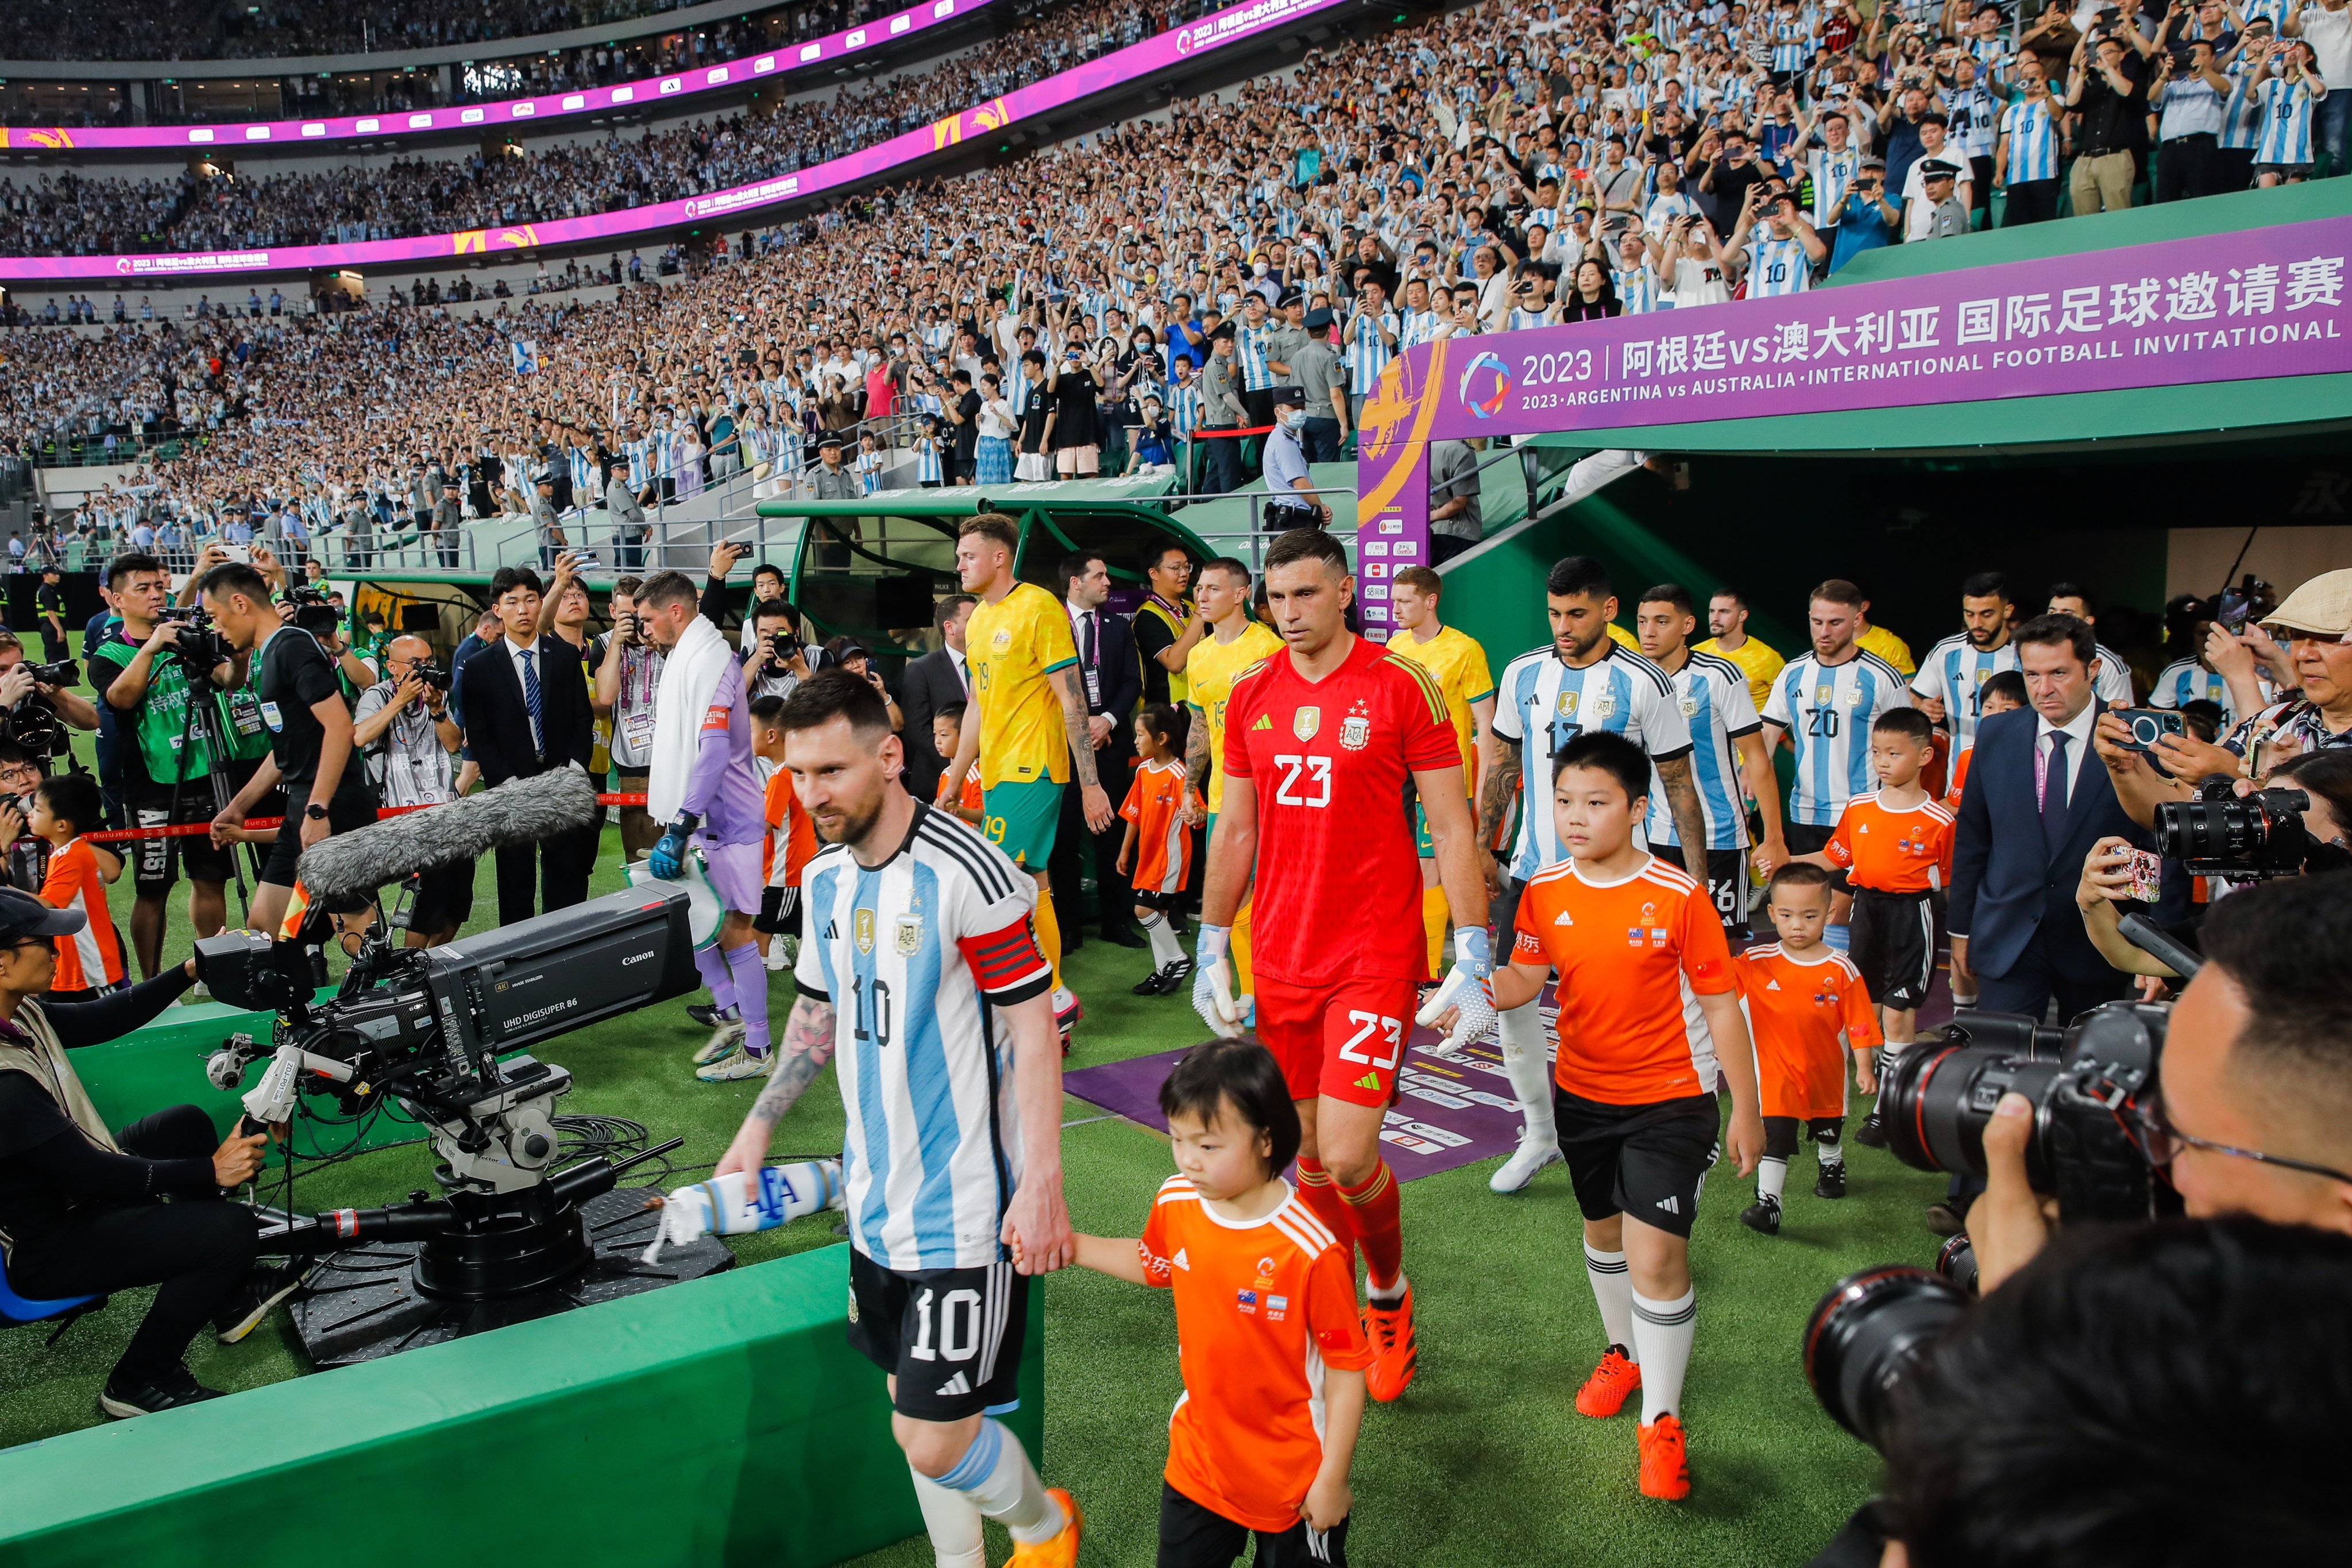 Lionel Messi leads Argentina on to the pitch for their football friendly against Australia in Beijing. Photo: EPA-EFE